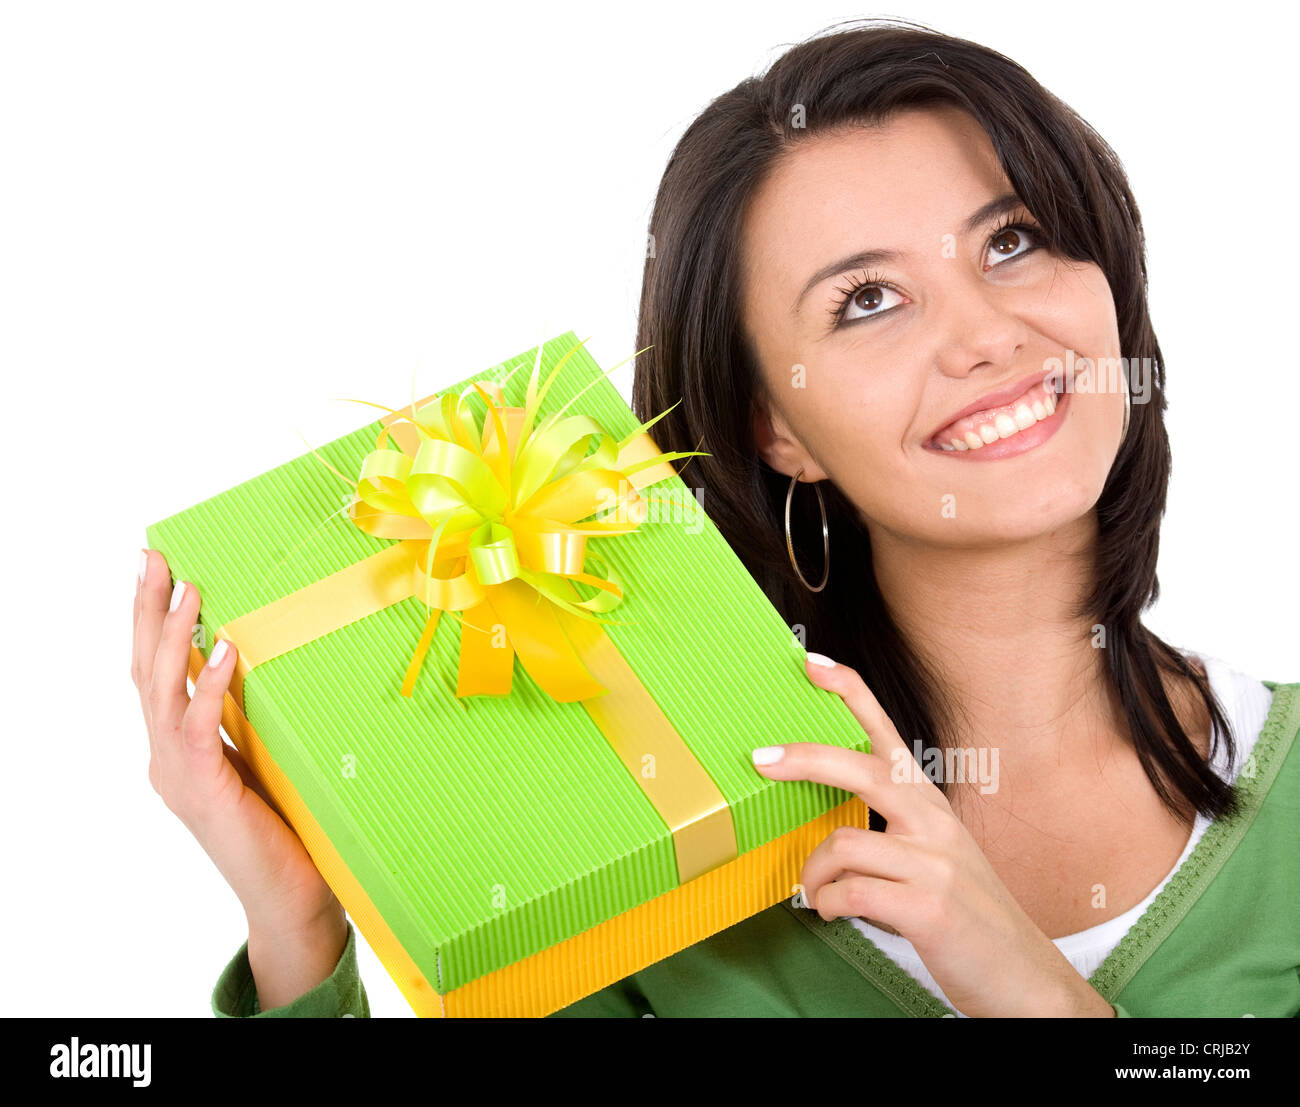 beautiful girl with a gift Stock Photo